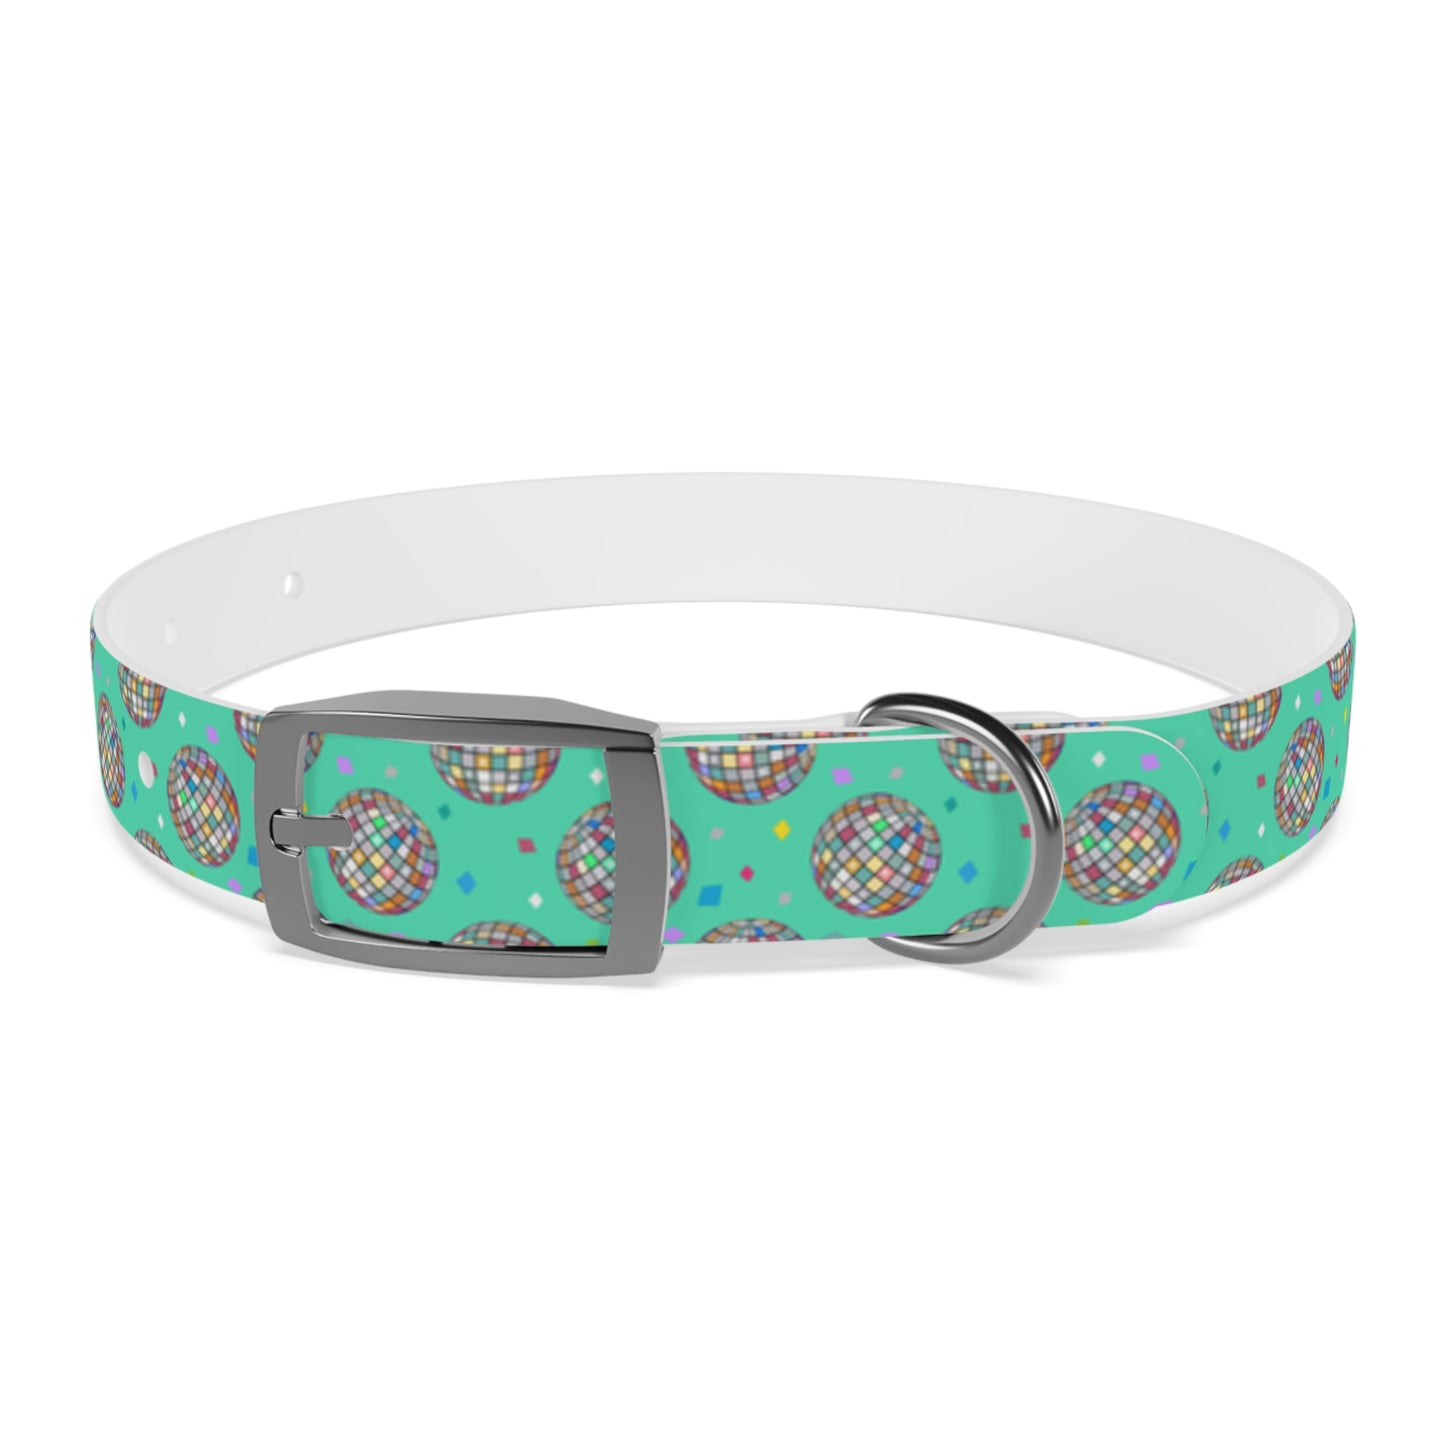 Disco Ball Turquoise Personalized Dog Collar -Choose Buckle Finish